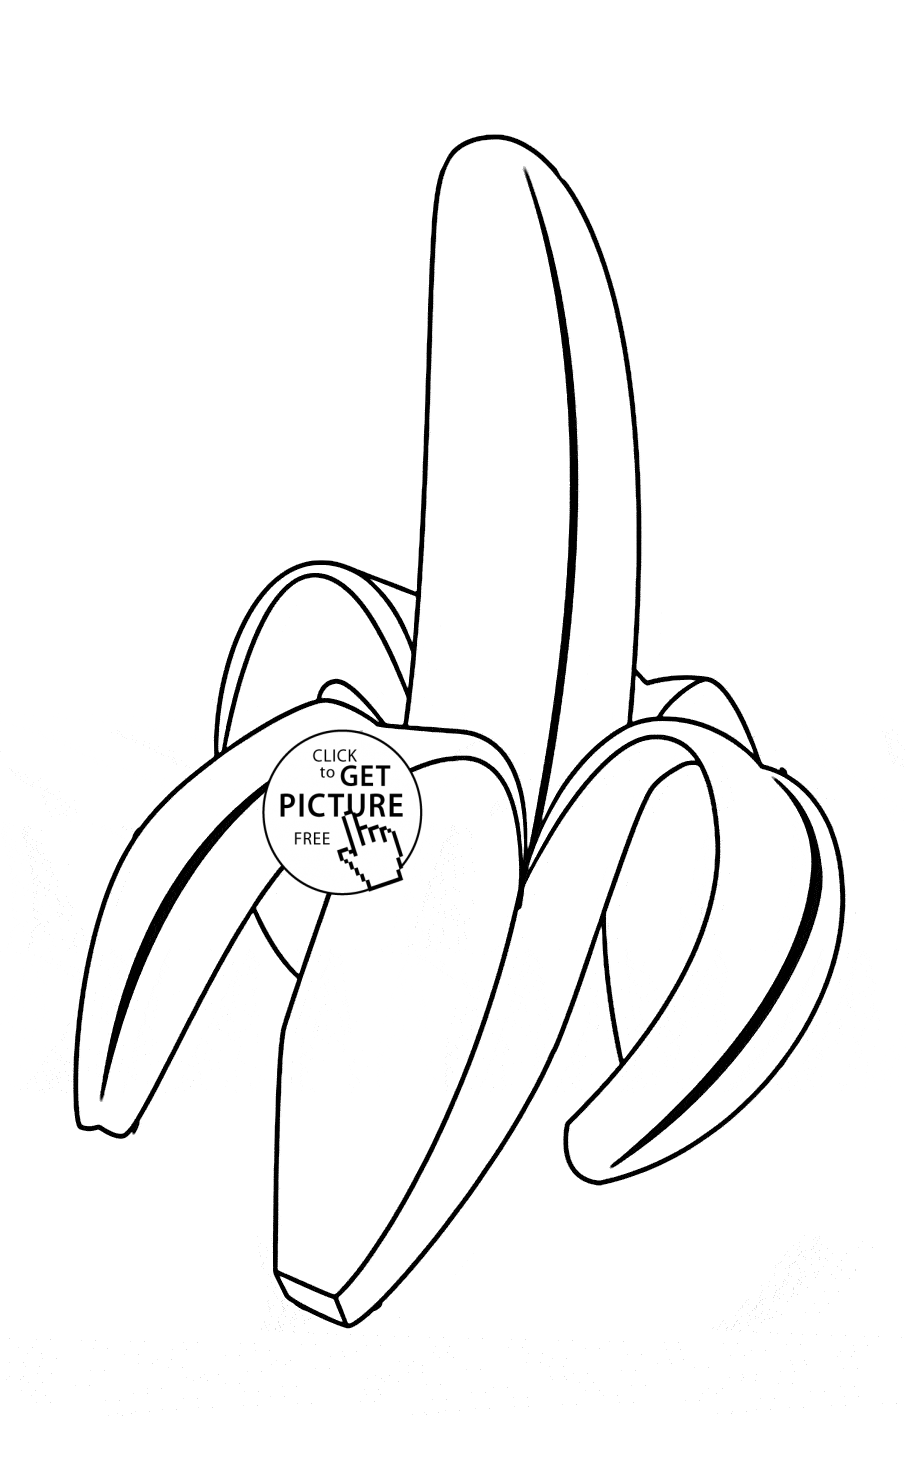 Tropical Fruits Coloring Pages - Coloring and Drawing